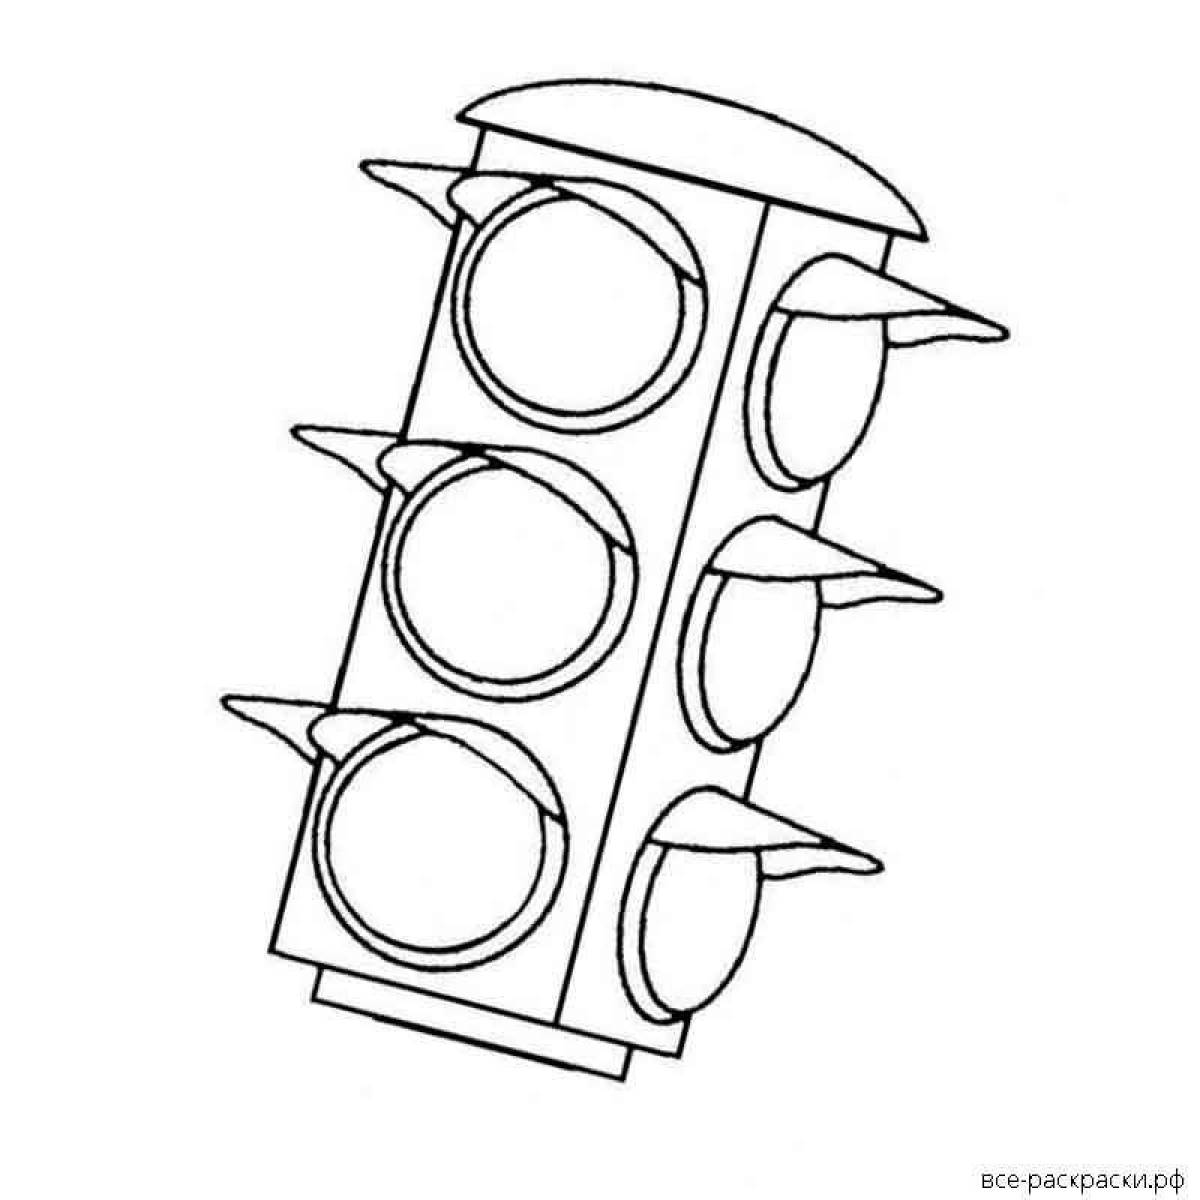 Attractive traffic light coloring page